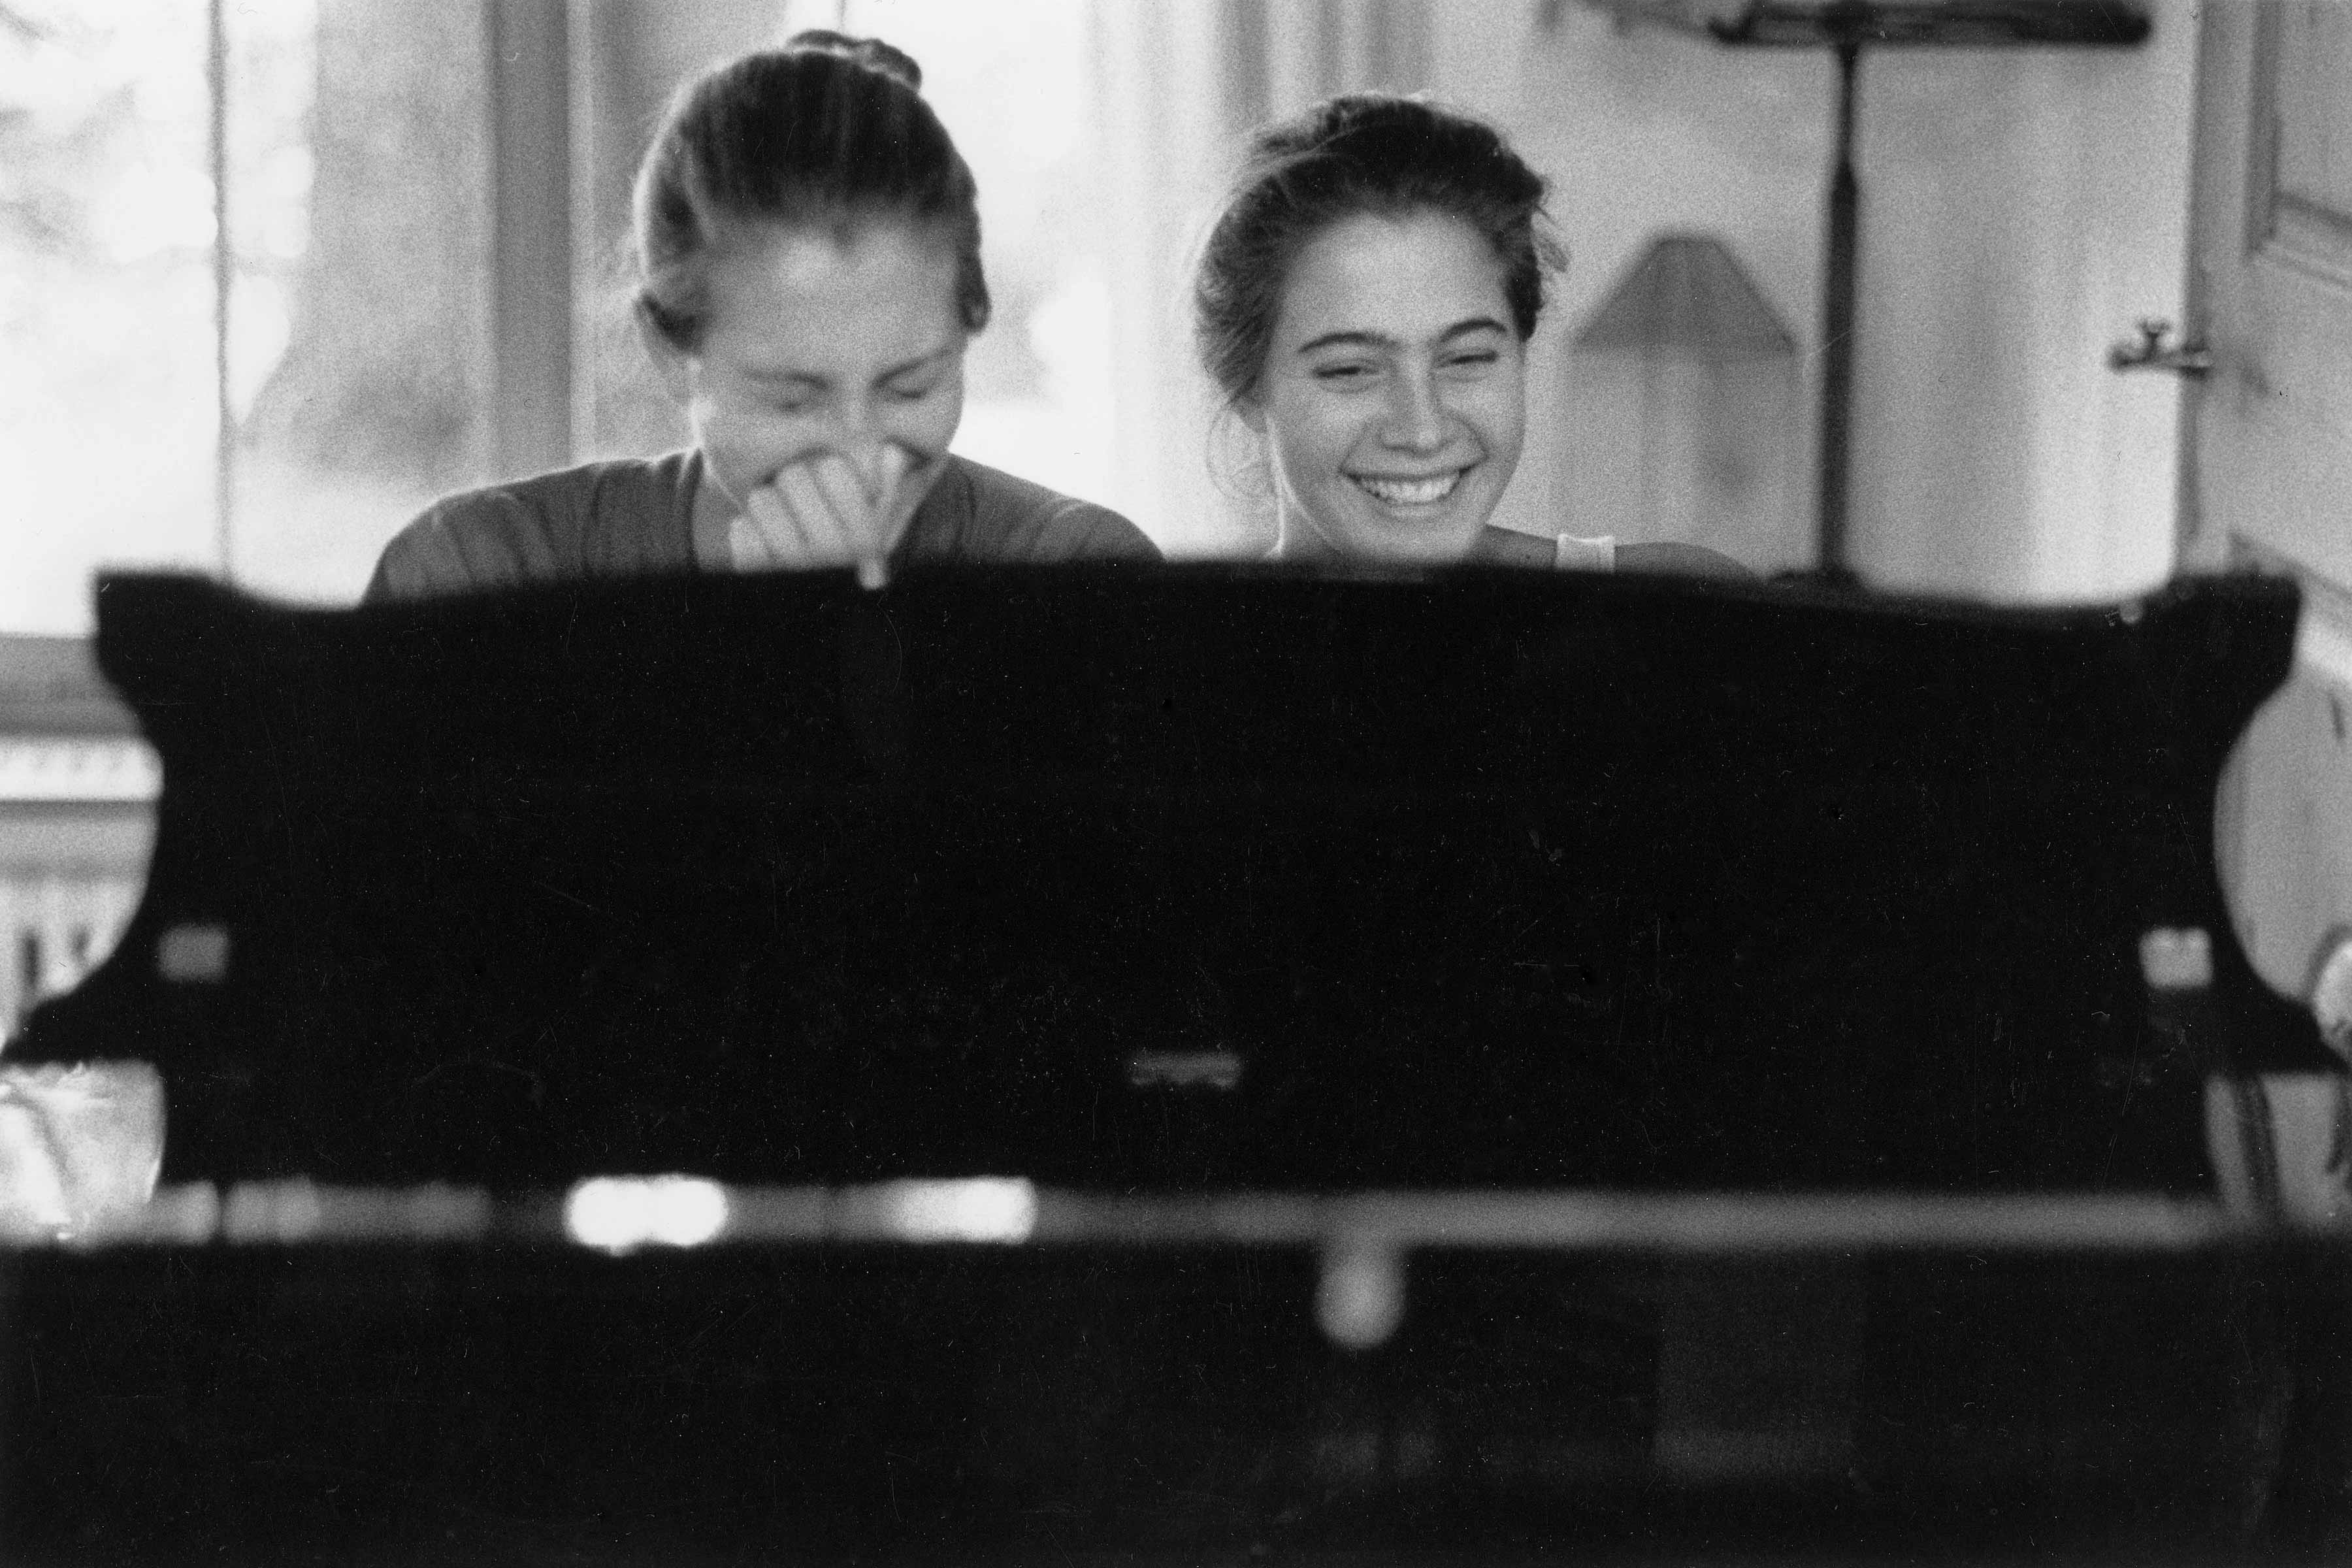 Eva 15 years old playing piano with her sister and laughing together